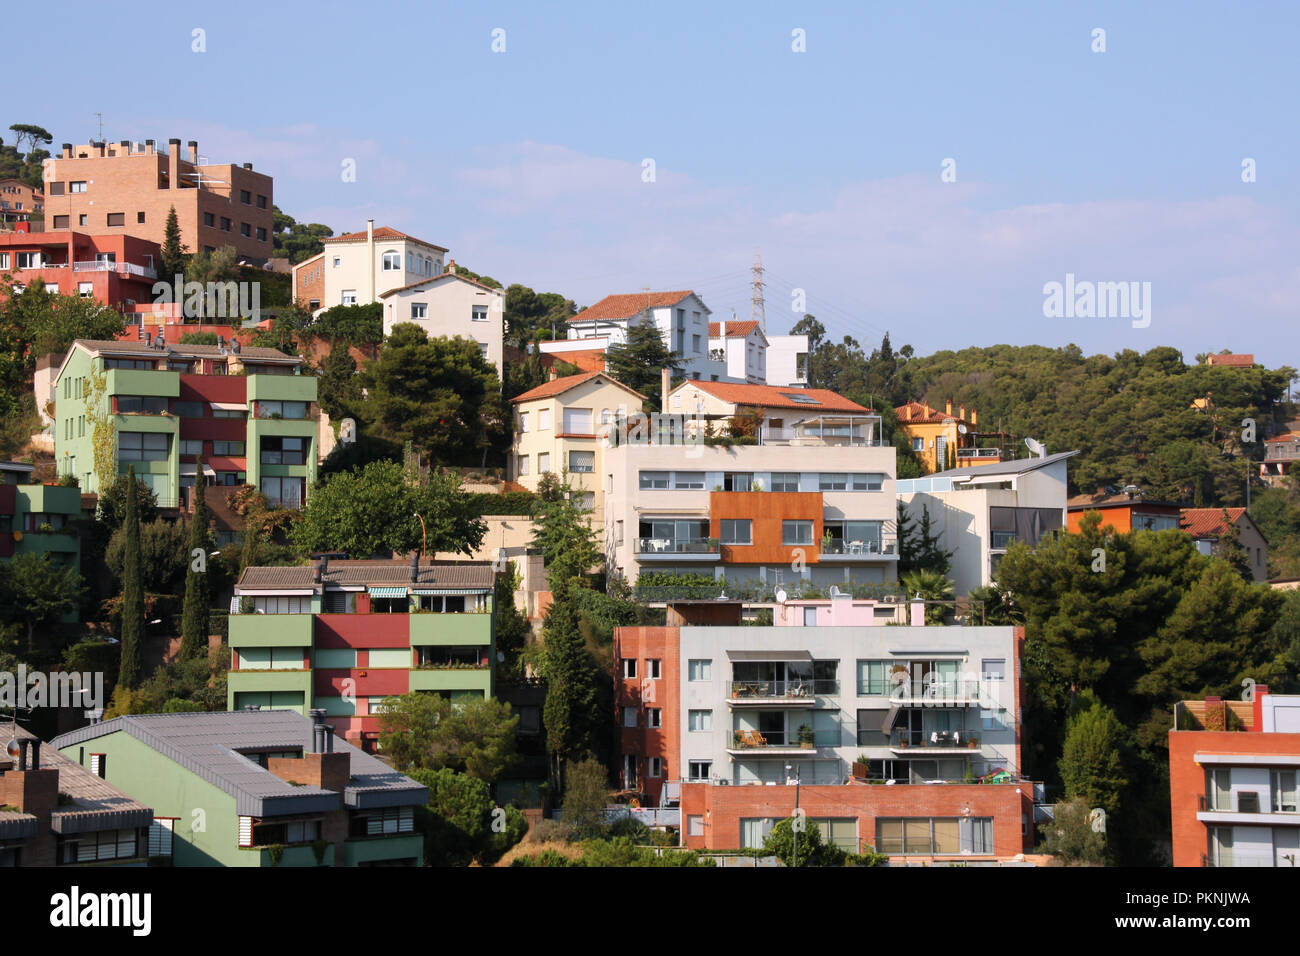 Tibidabo, Barcelona. Residential district located on a hillside. Spanish houses. Stock Photo